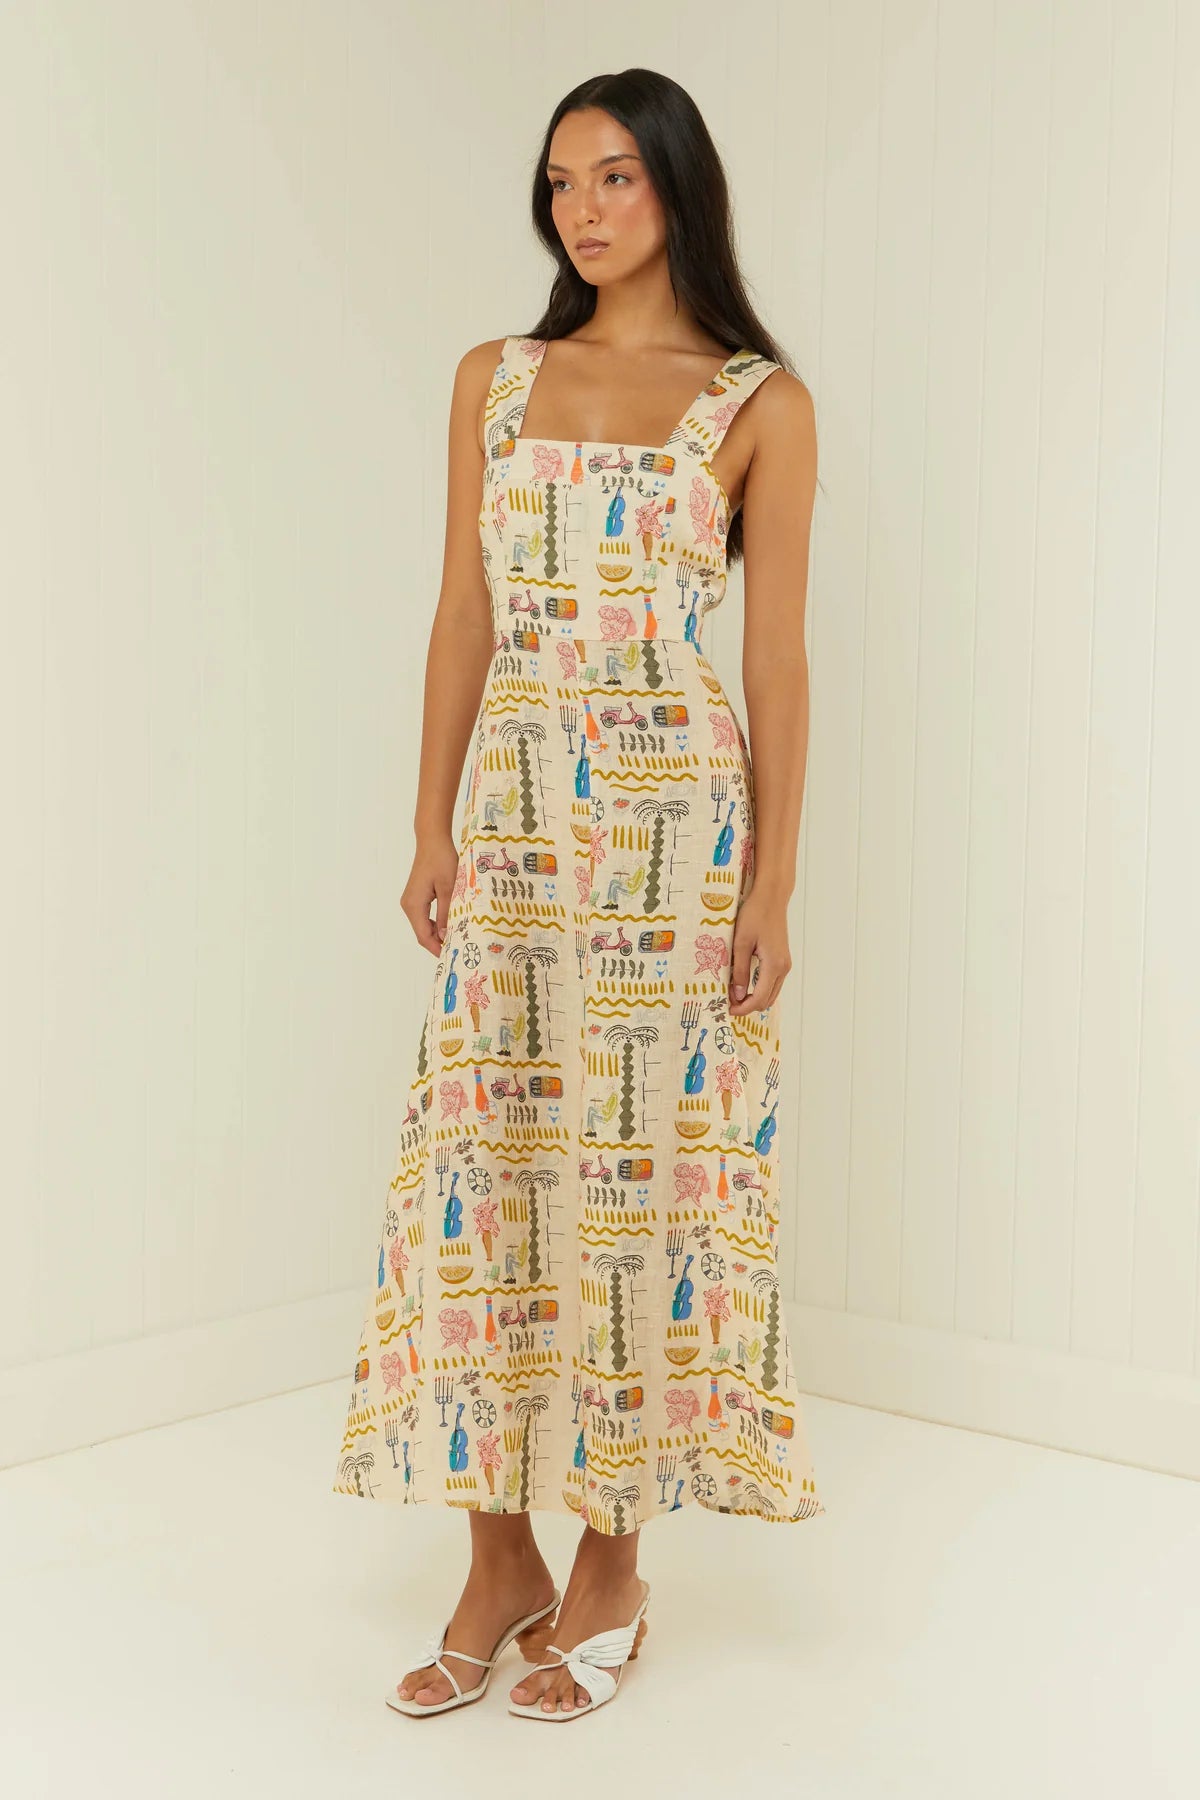 Linen summer dress in Italian inspired print with a fitted bodice and A line skirt